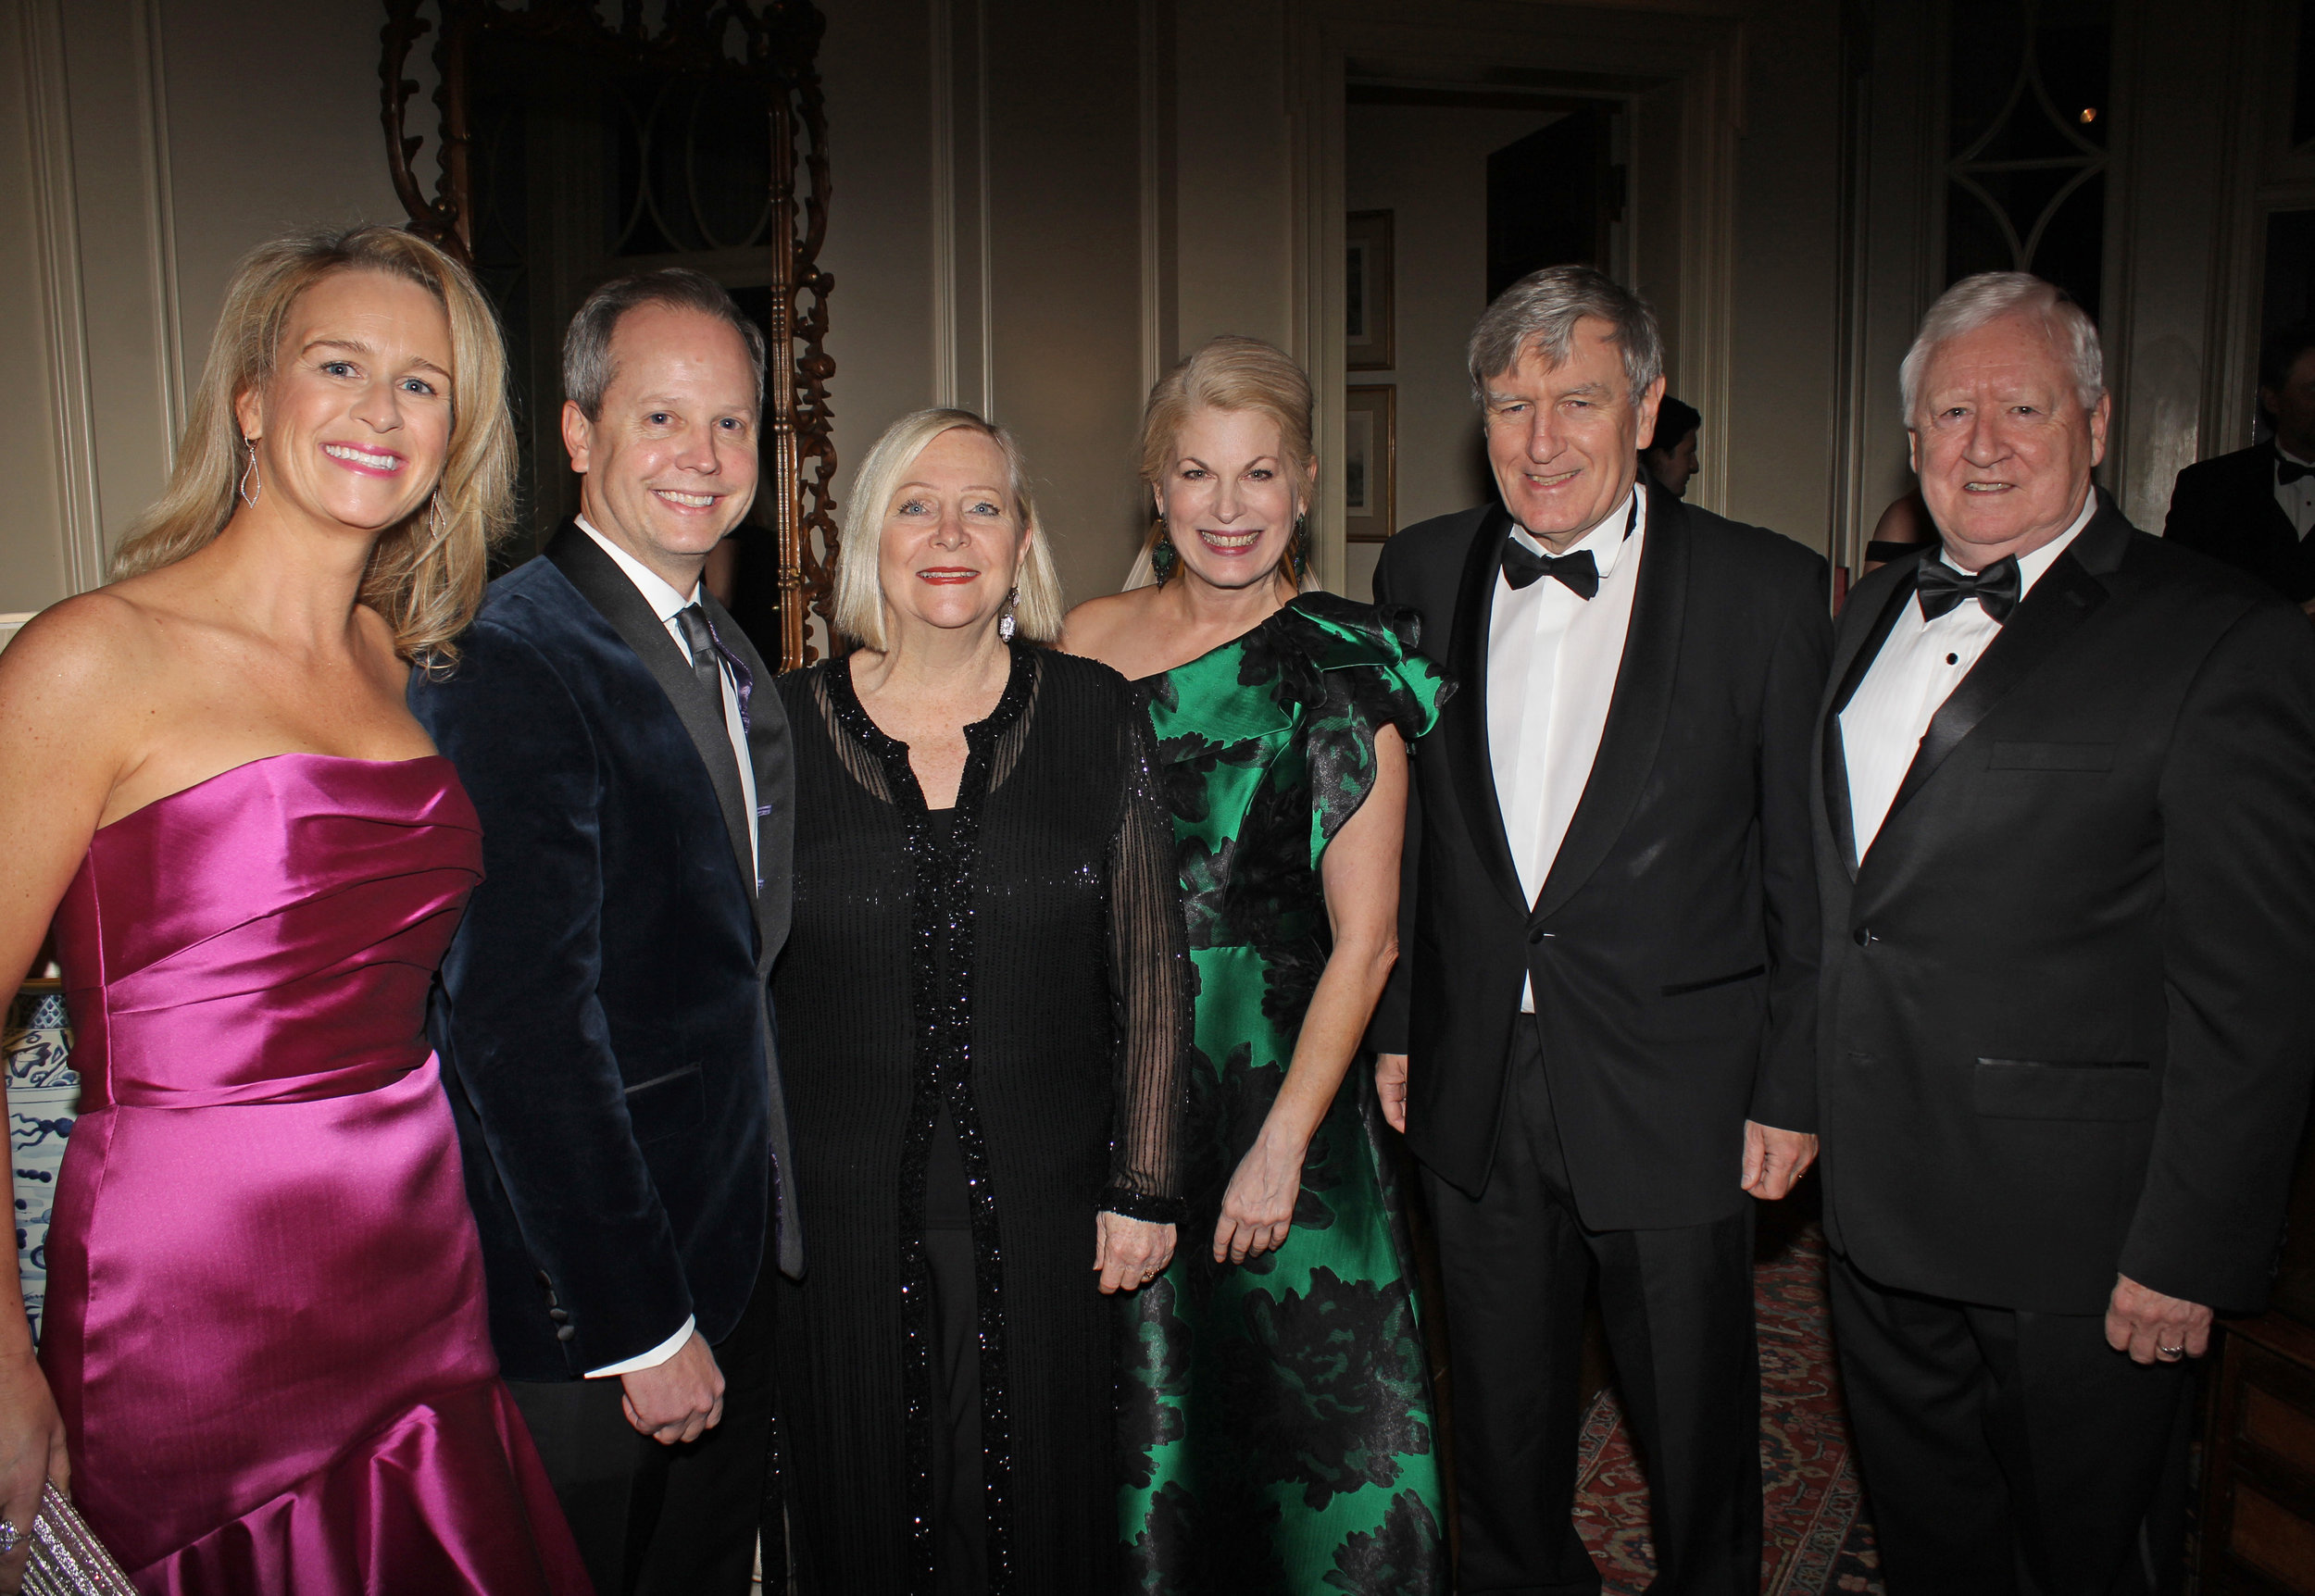  Molly Schugel and Jason Schugel, Allegro Board Chairman and Chief Risk Officer for Ally Financial; Greta Mulhall; Pat Farmer, Allegro Founder &amp; President; His Excellency, Daniel Mulhall, Ambassador of Ireland to the United States; and Dr. John Y